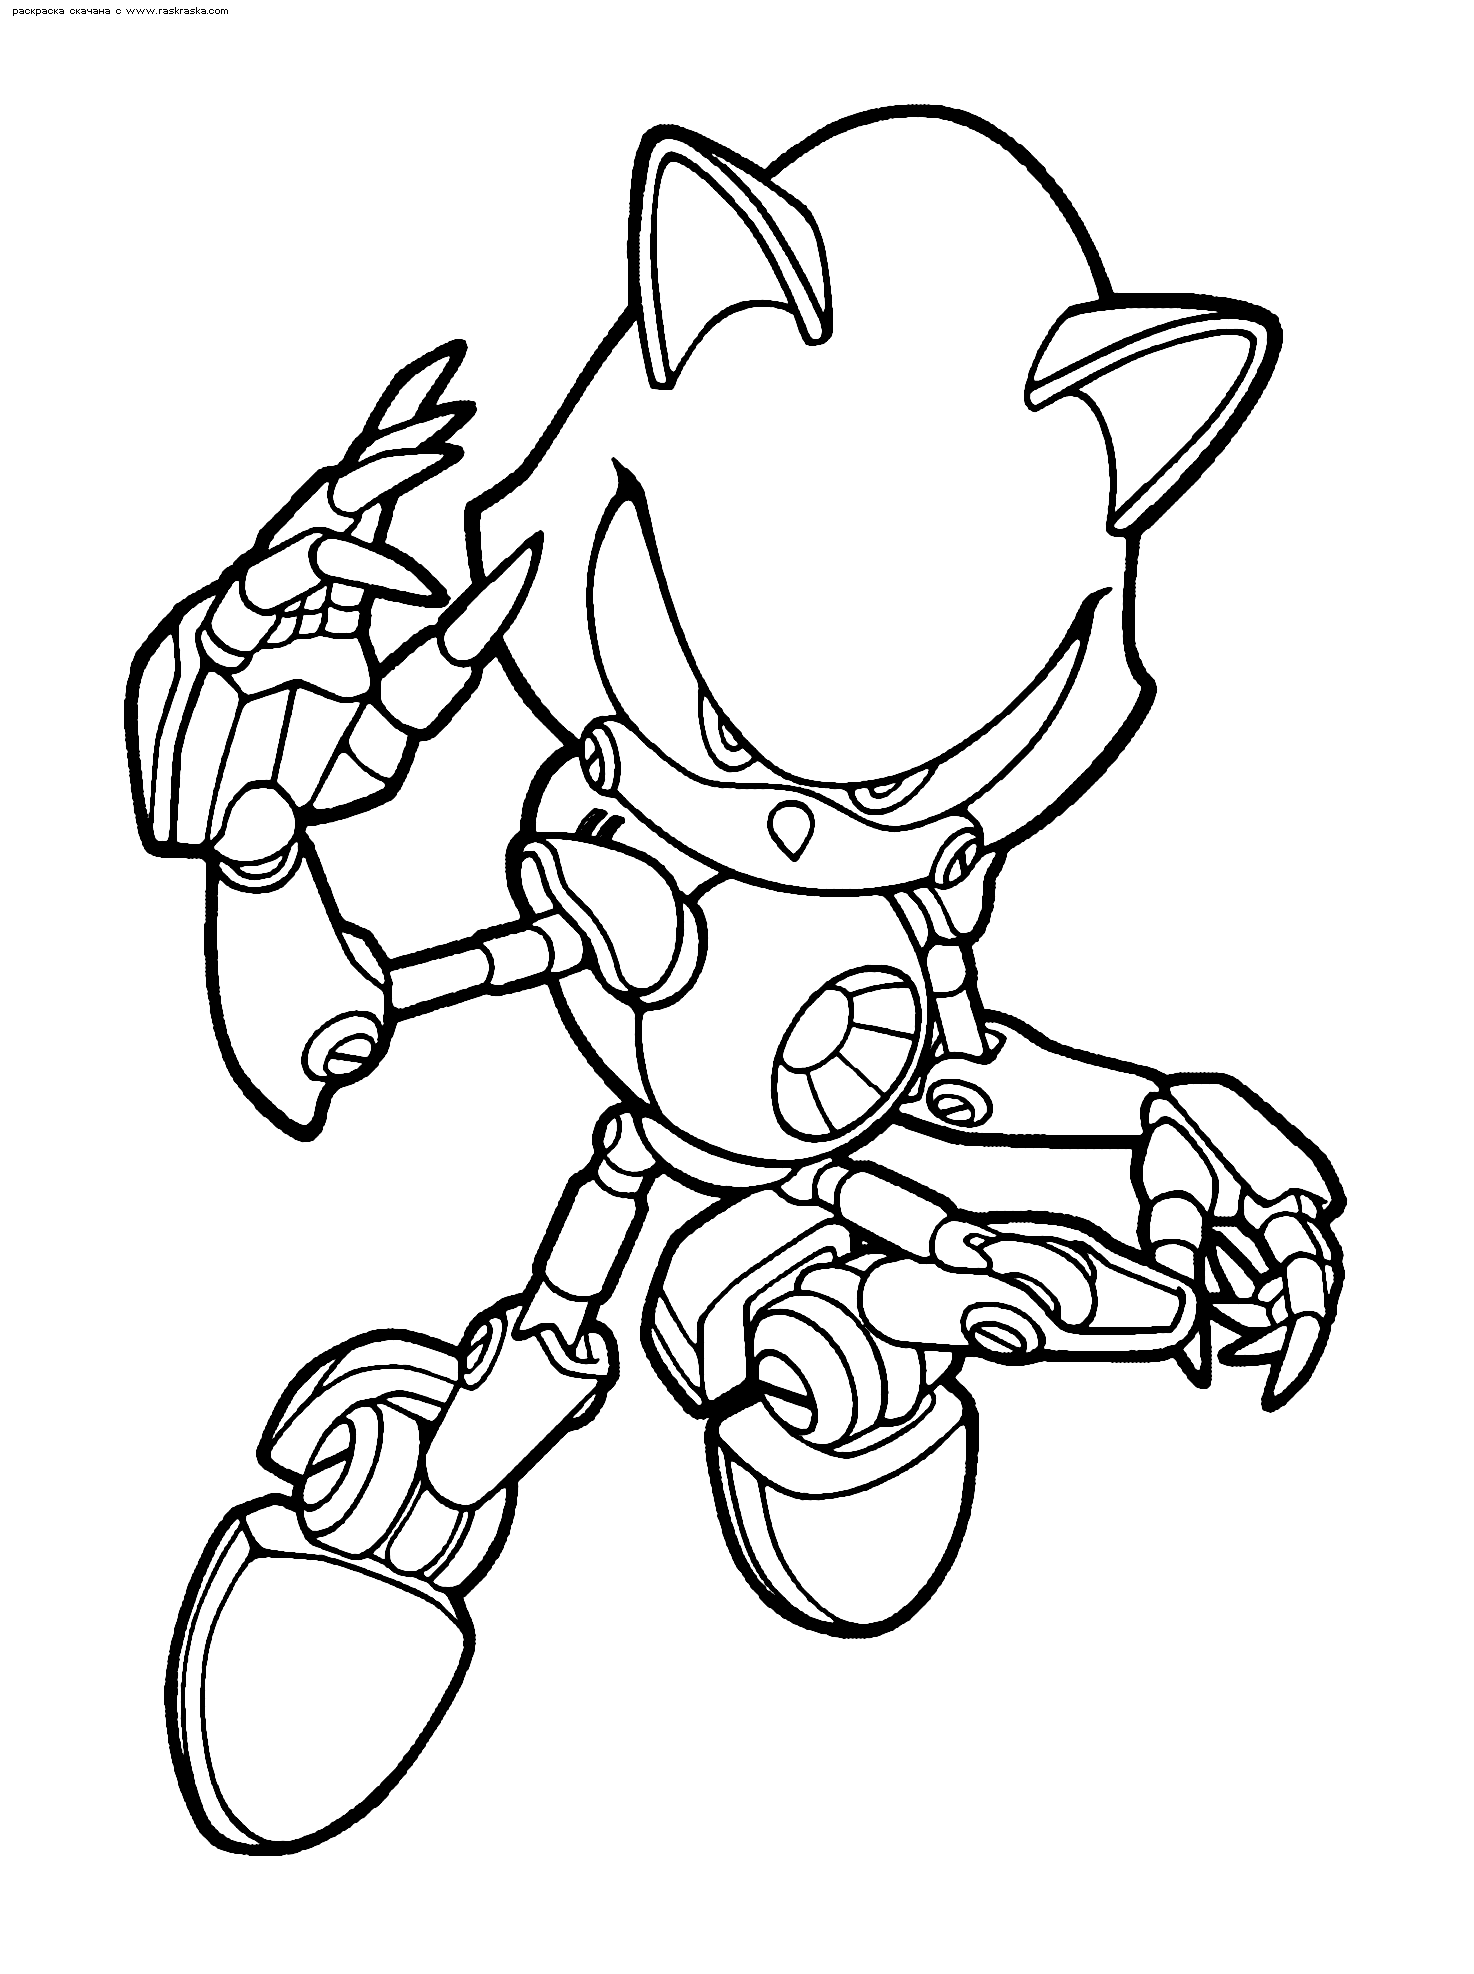 sonic coloring page sonic the hedgehog running coloring pages coloring home coloring page sonic 